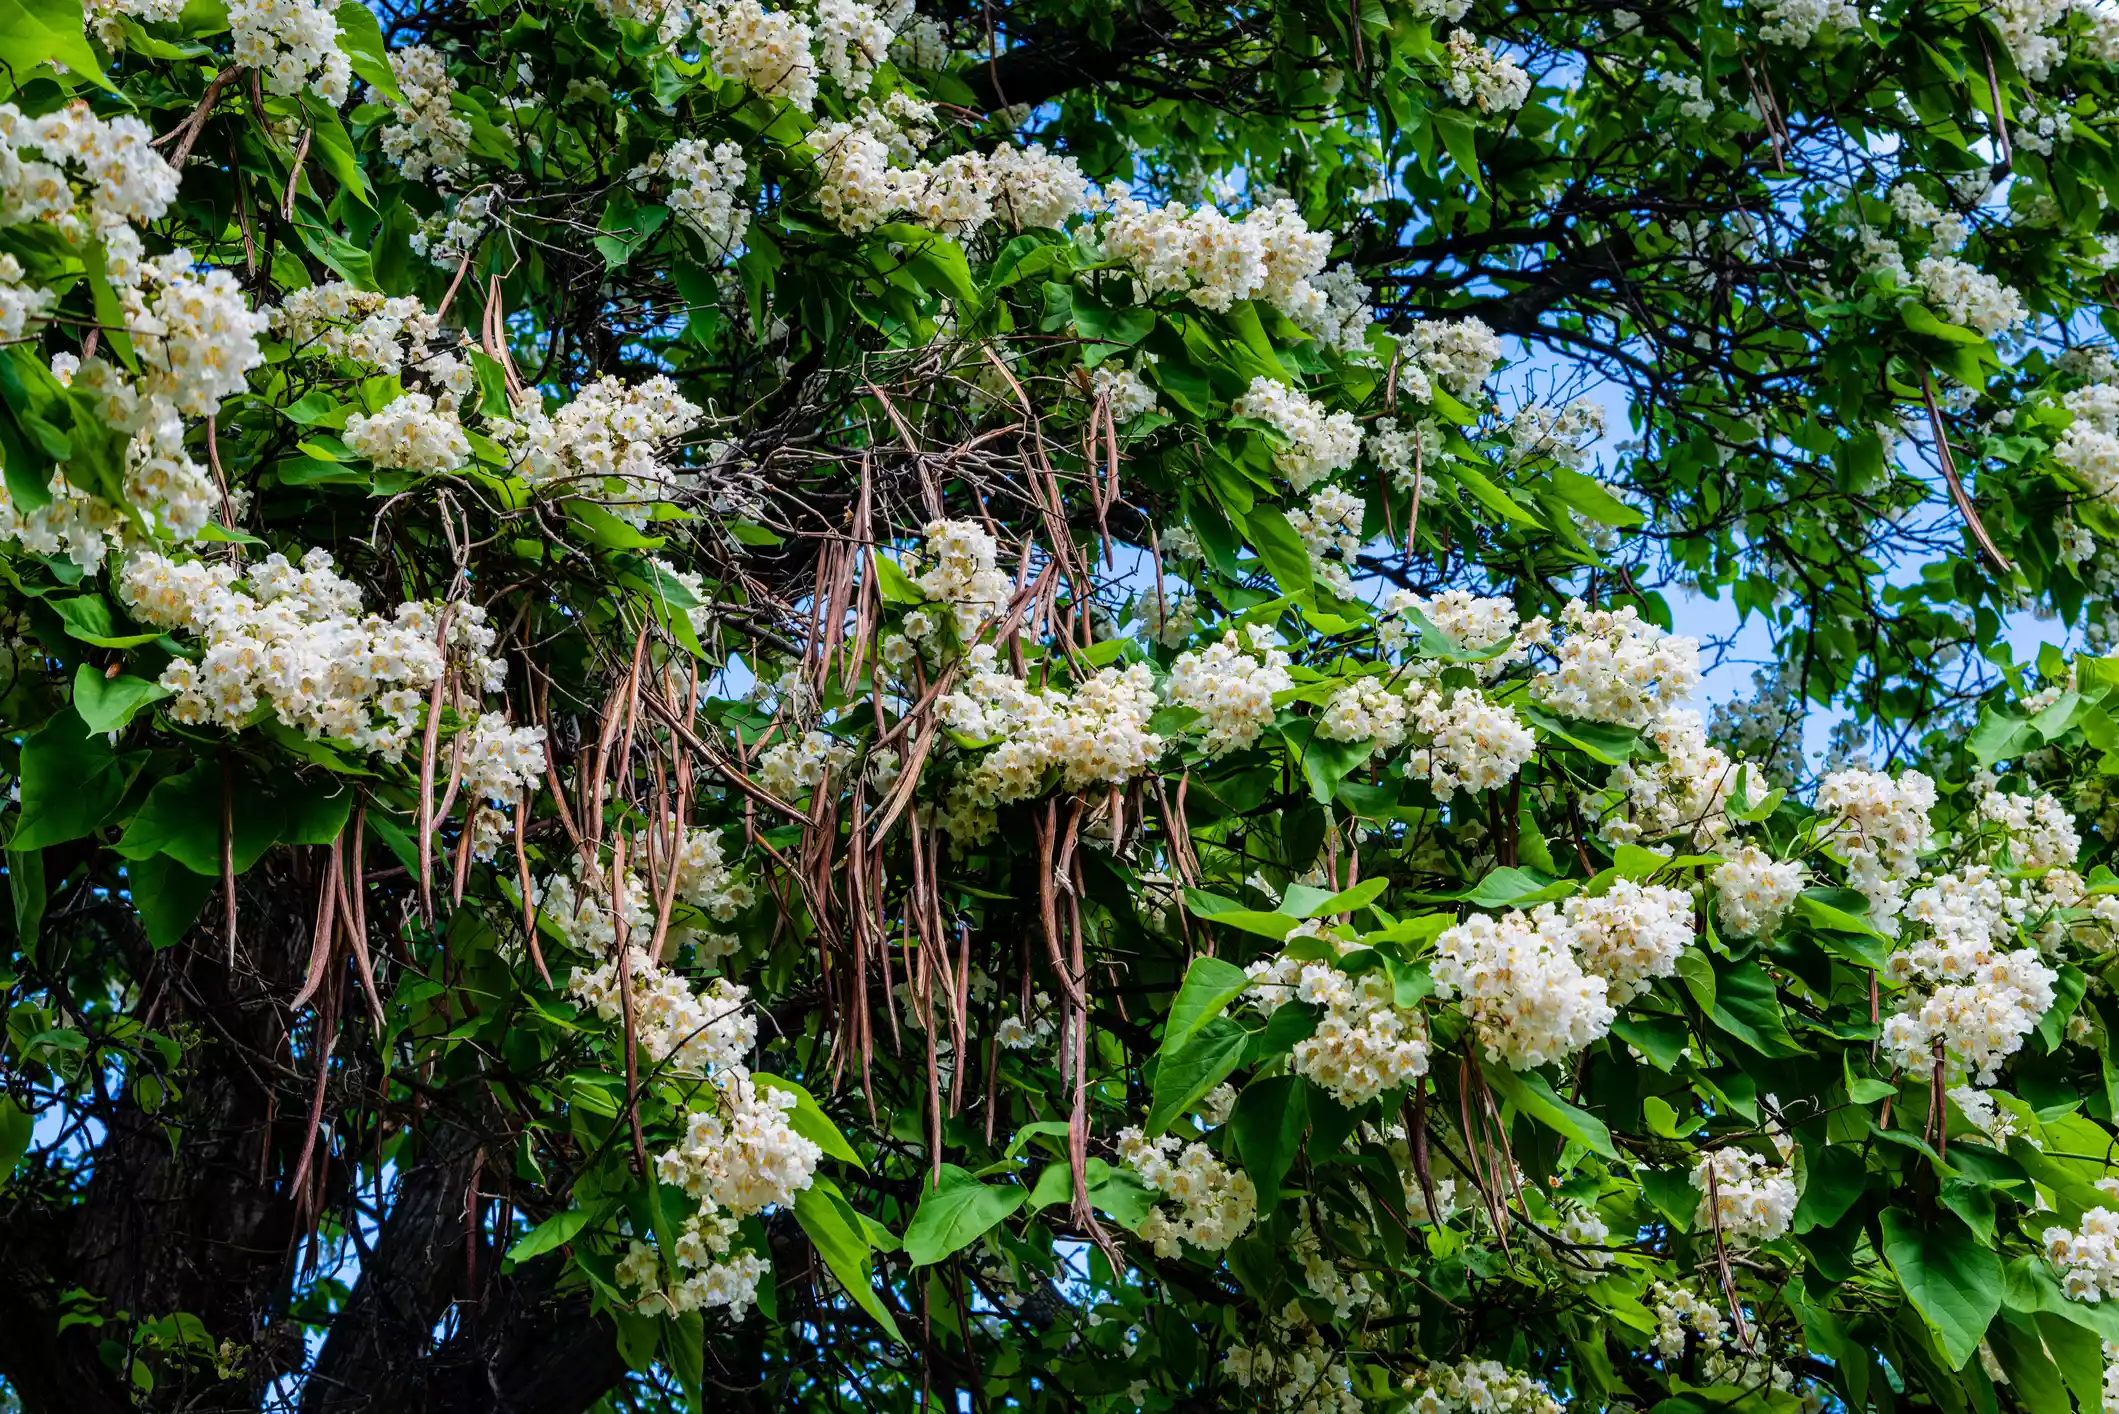 Northern catalpa with white flower clusters and large green leaves in bloom